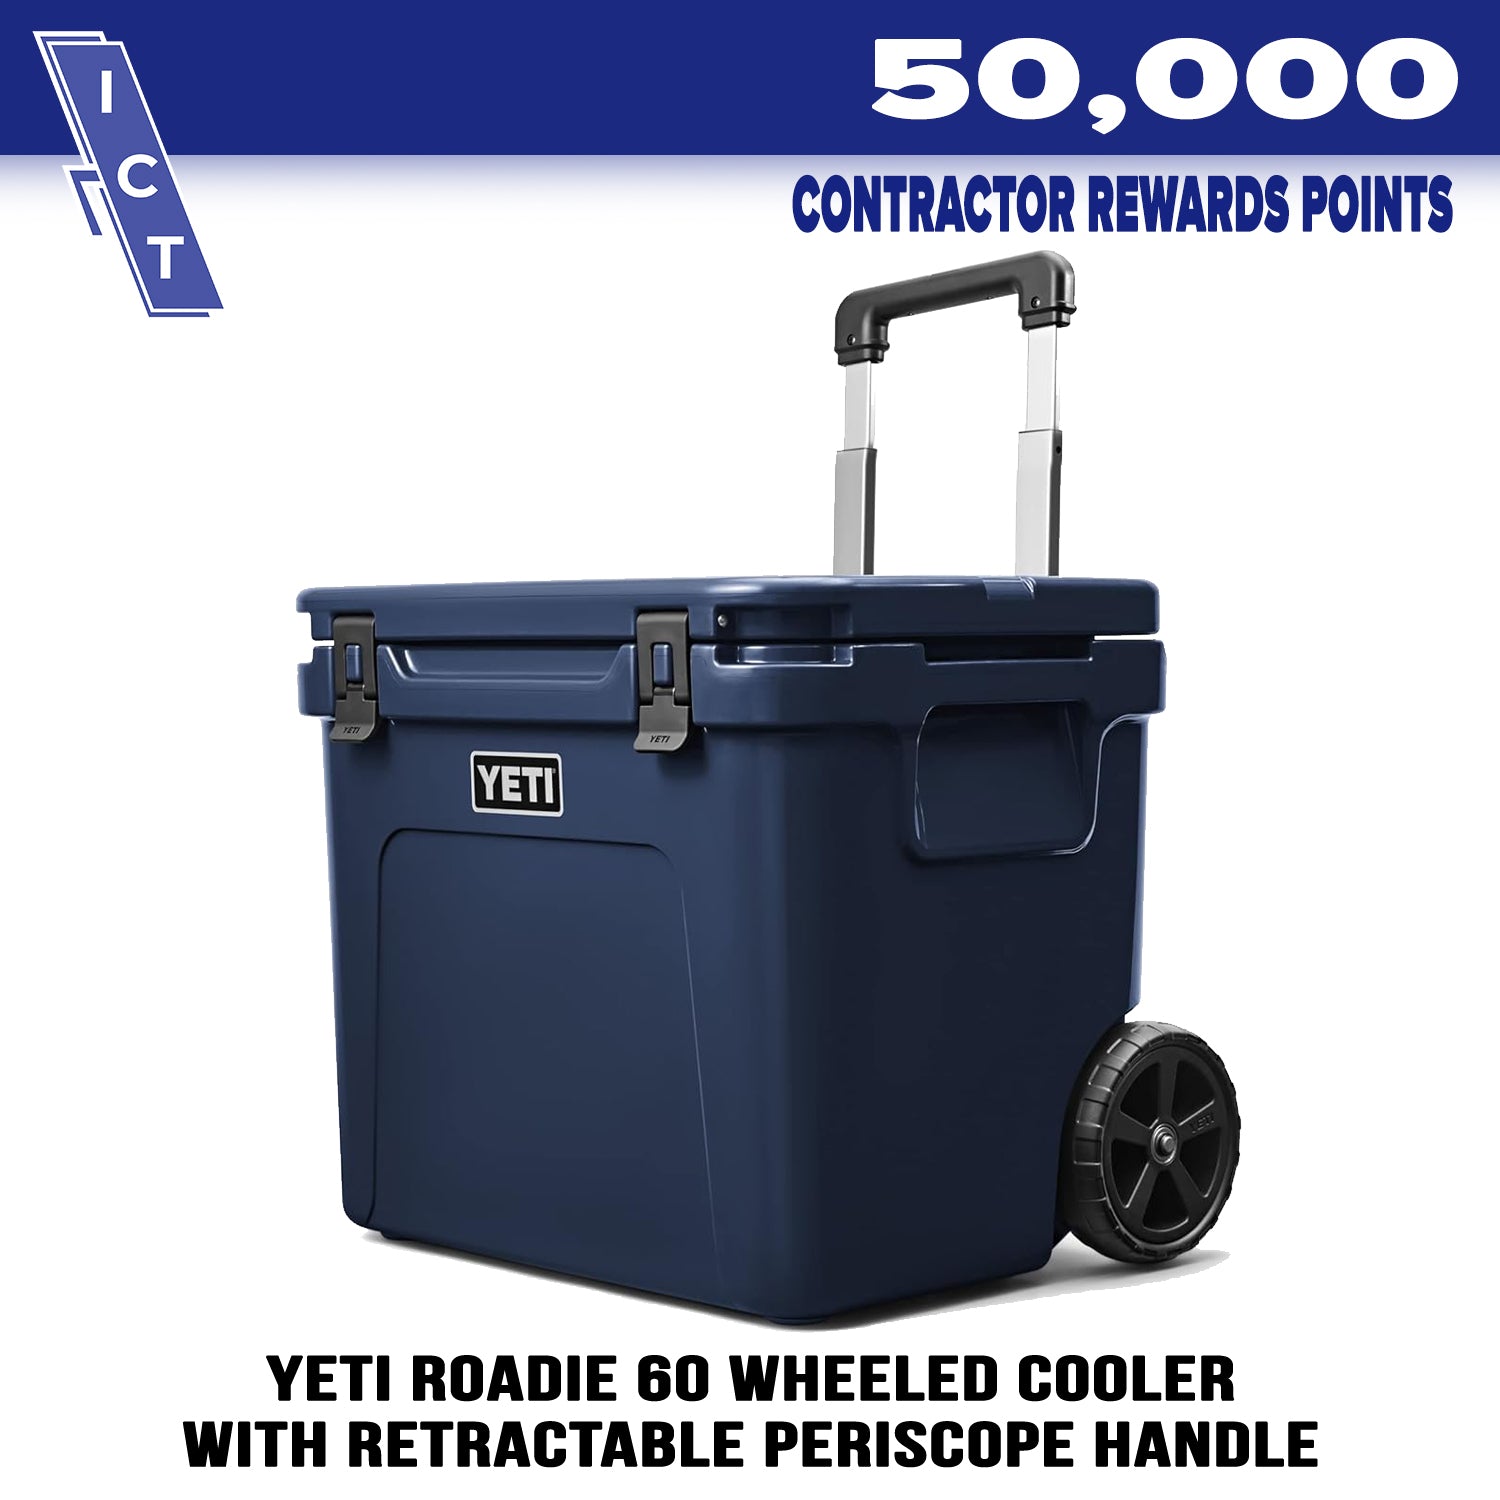 Yeti Roadie 60 wheeled cooler prize for 50000 points